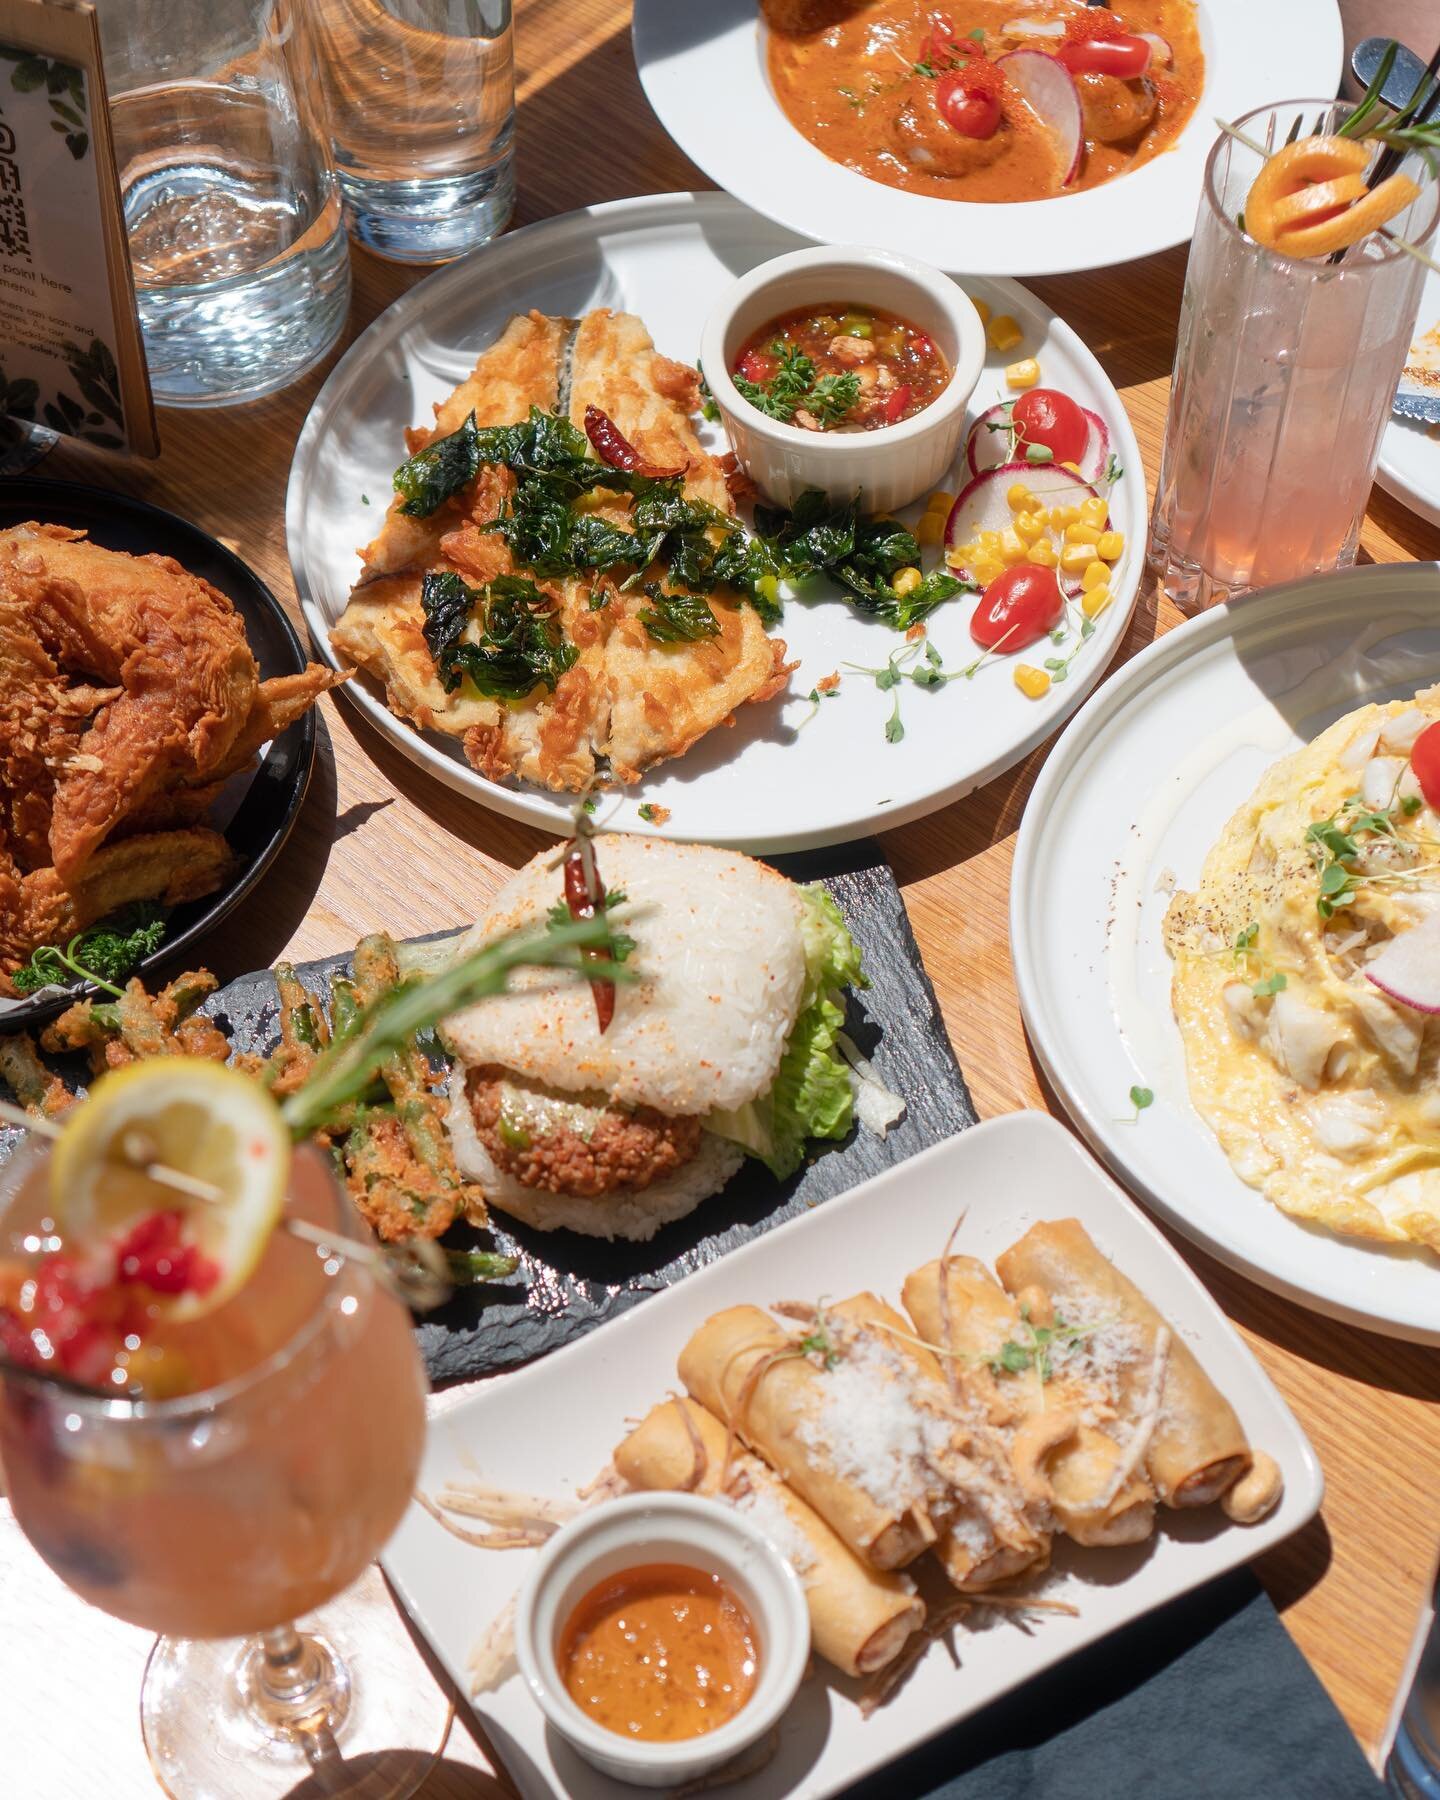 📍 First Hill - @di_fiora_seattle

What We Ordered:
- Lava Scallop
- Vietnamese Crunchy Spring Rolls
- Korat Chicken Wings
- Basil Sticky Rice Burger
- Banda Sea Crispy Fish
- Dungeness Crab Fried Rice
- Drinks: Pink Lady and White Sangria

It's been